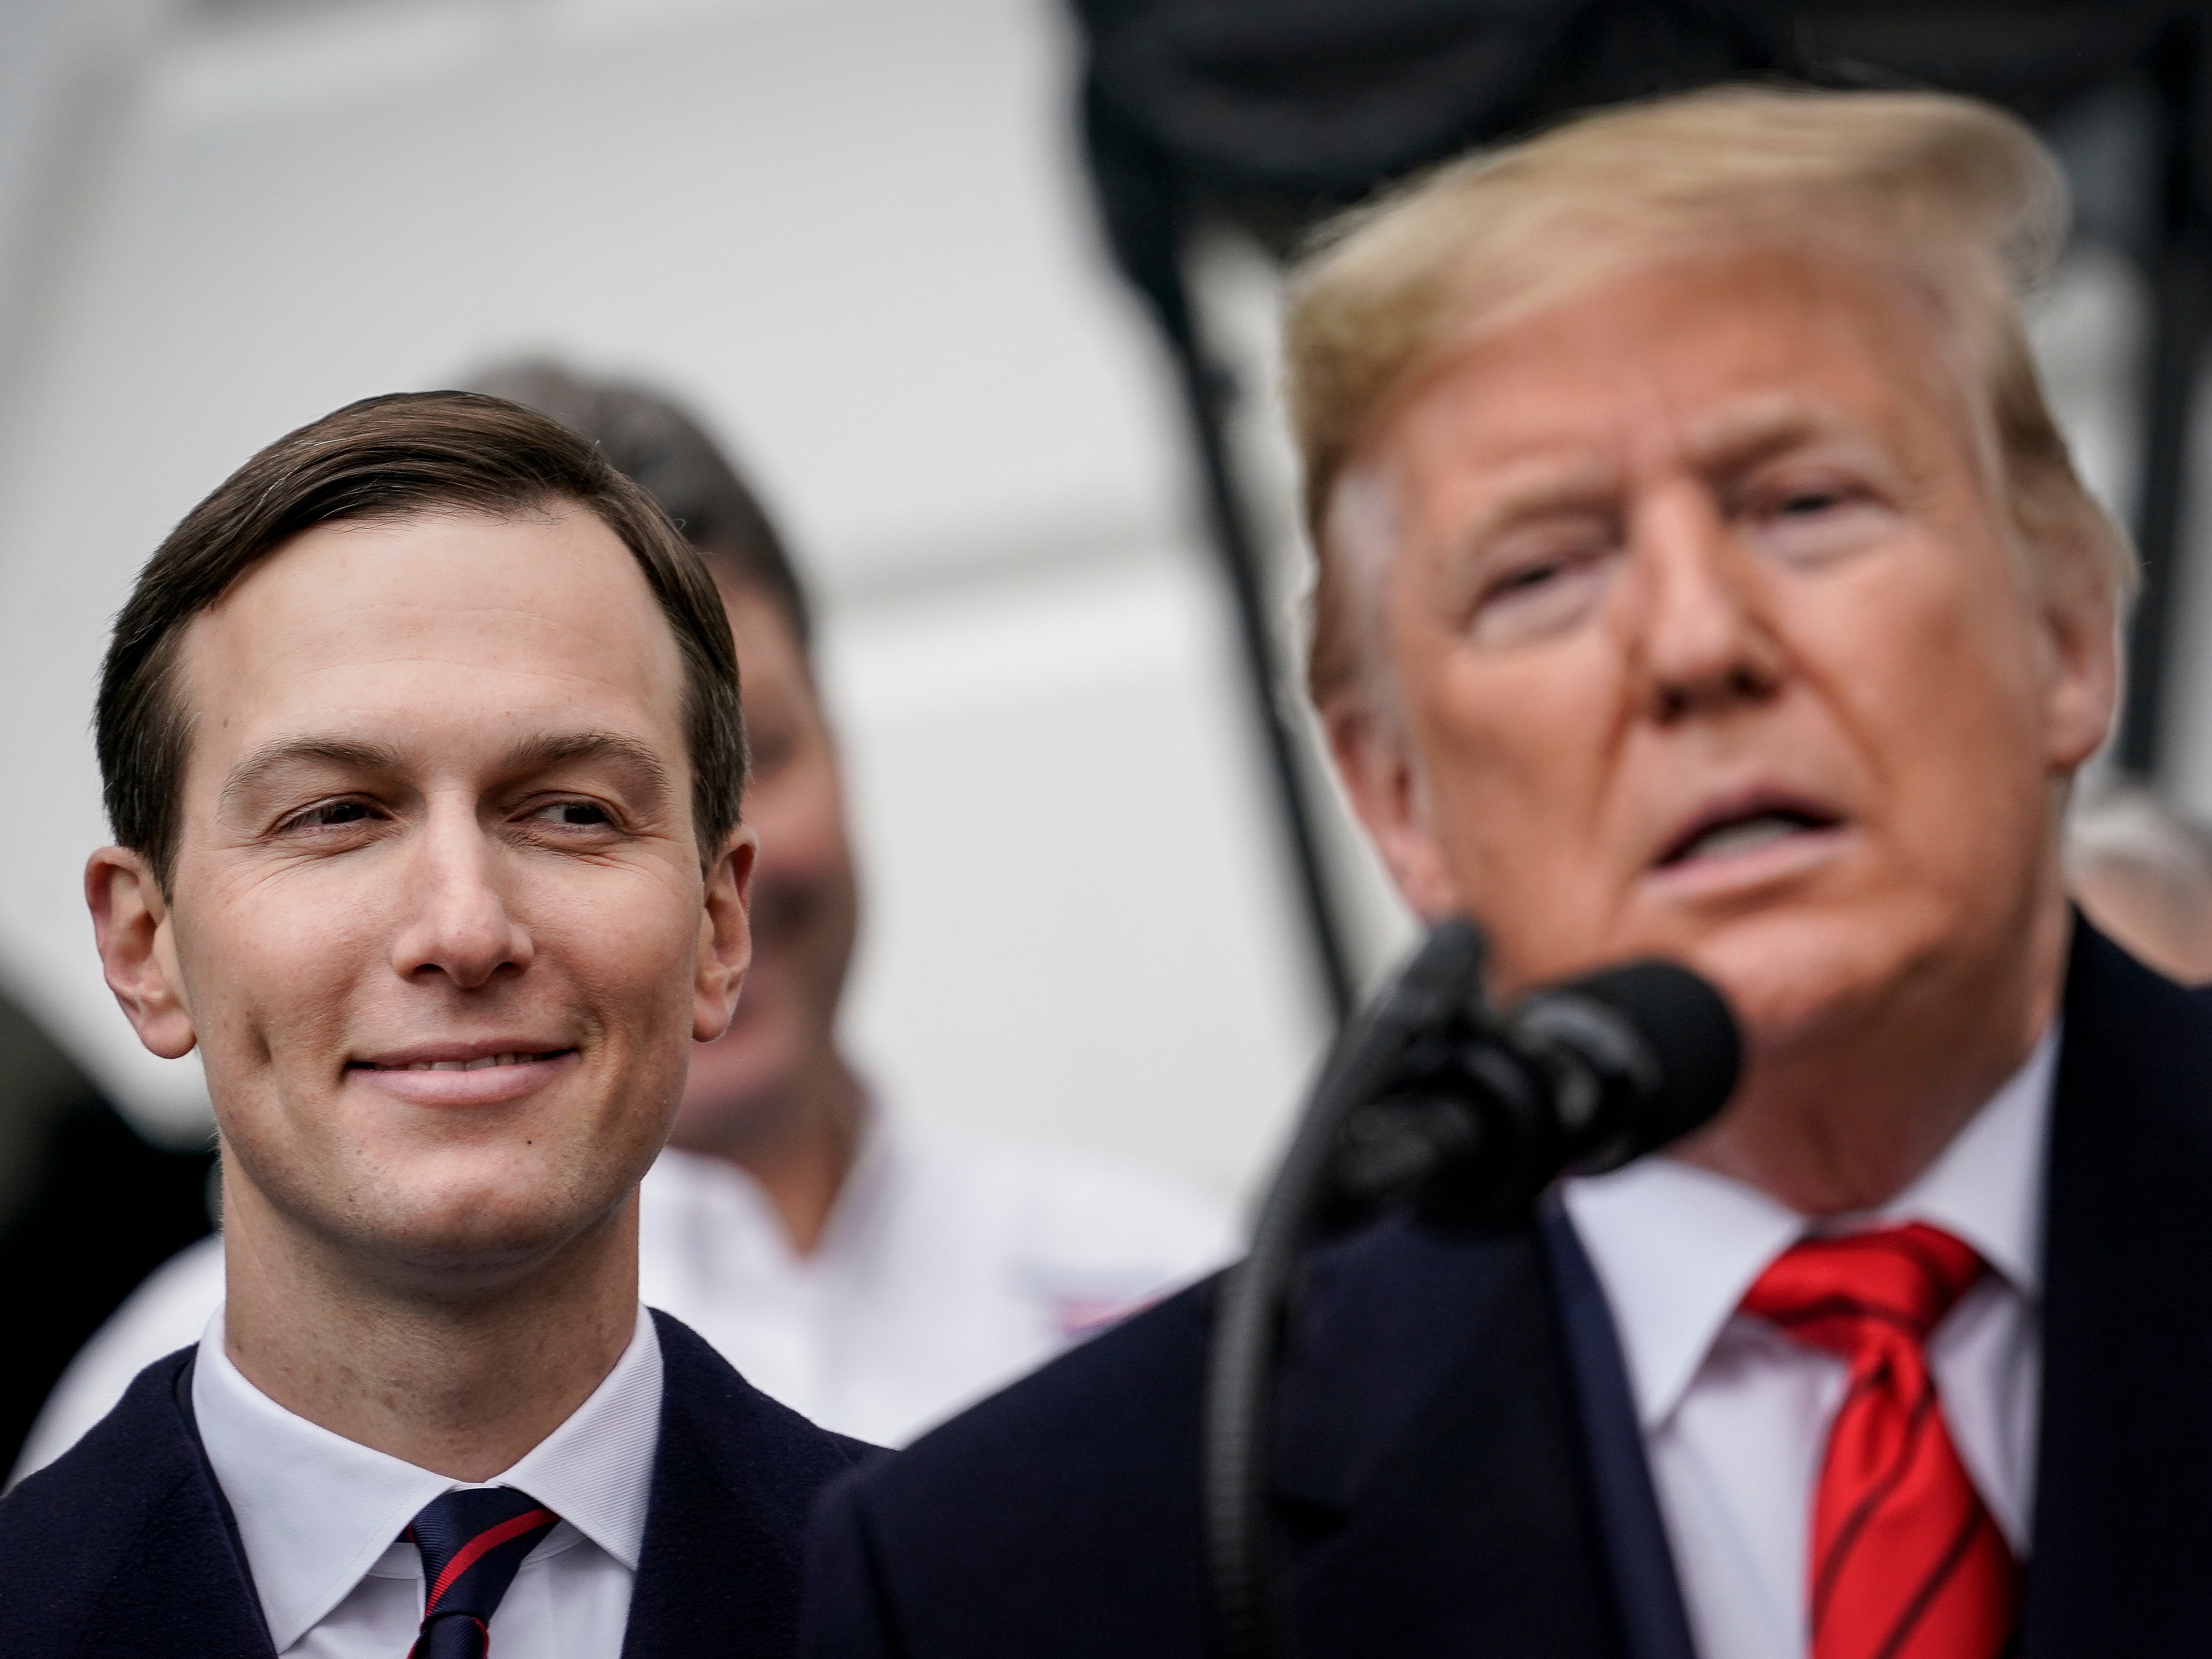 Donald Trump is ‘obviously thinking’ about running for US president again in 2024 according to his son-in-law Jared Kushner